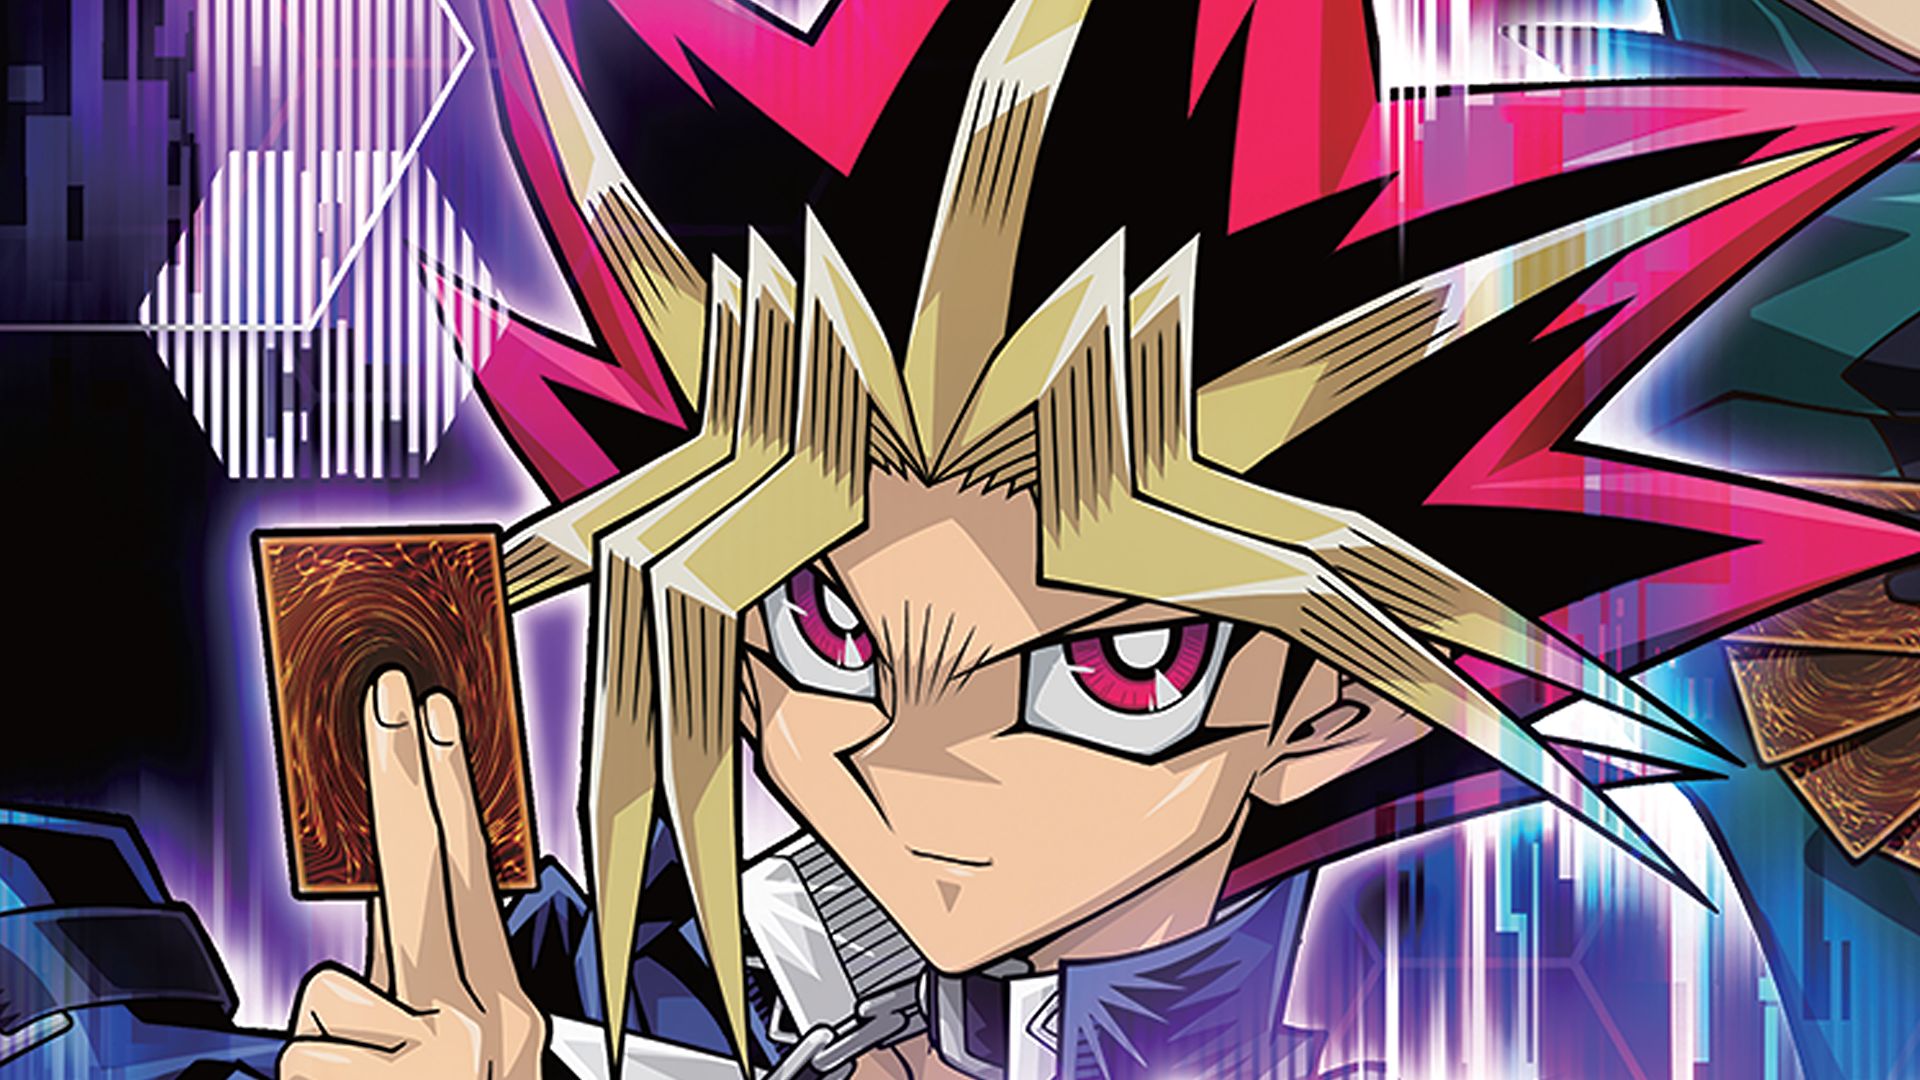 Are you in? These trading card anime let you play AND watch!